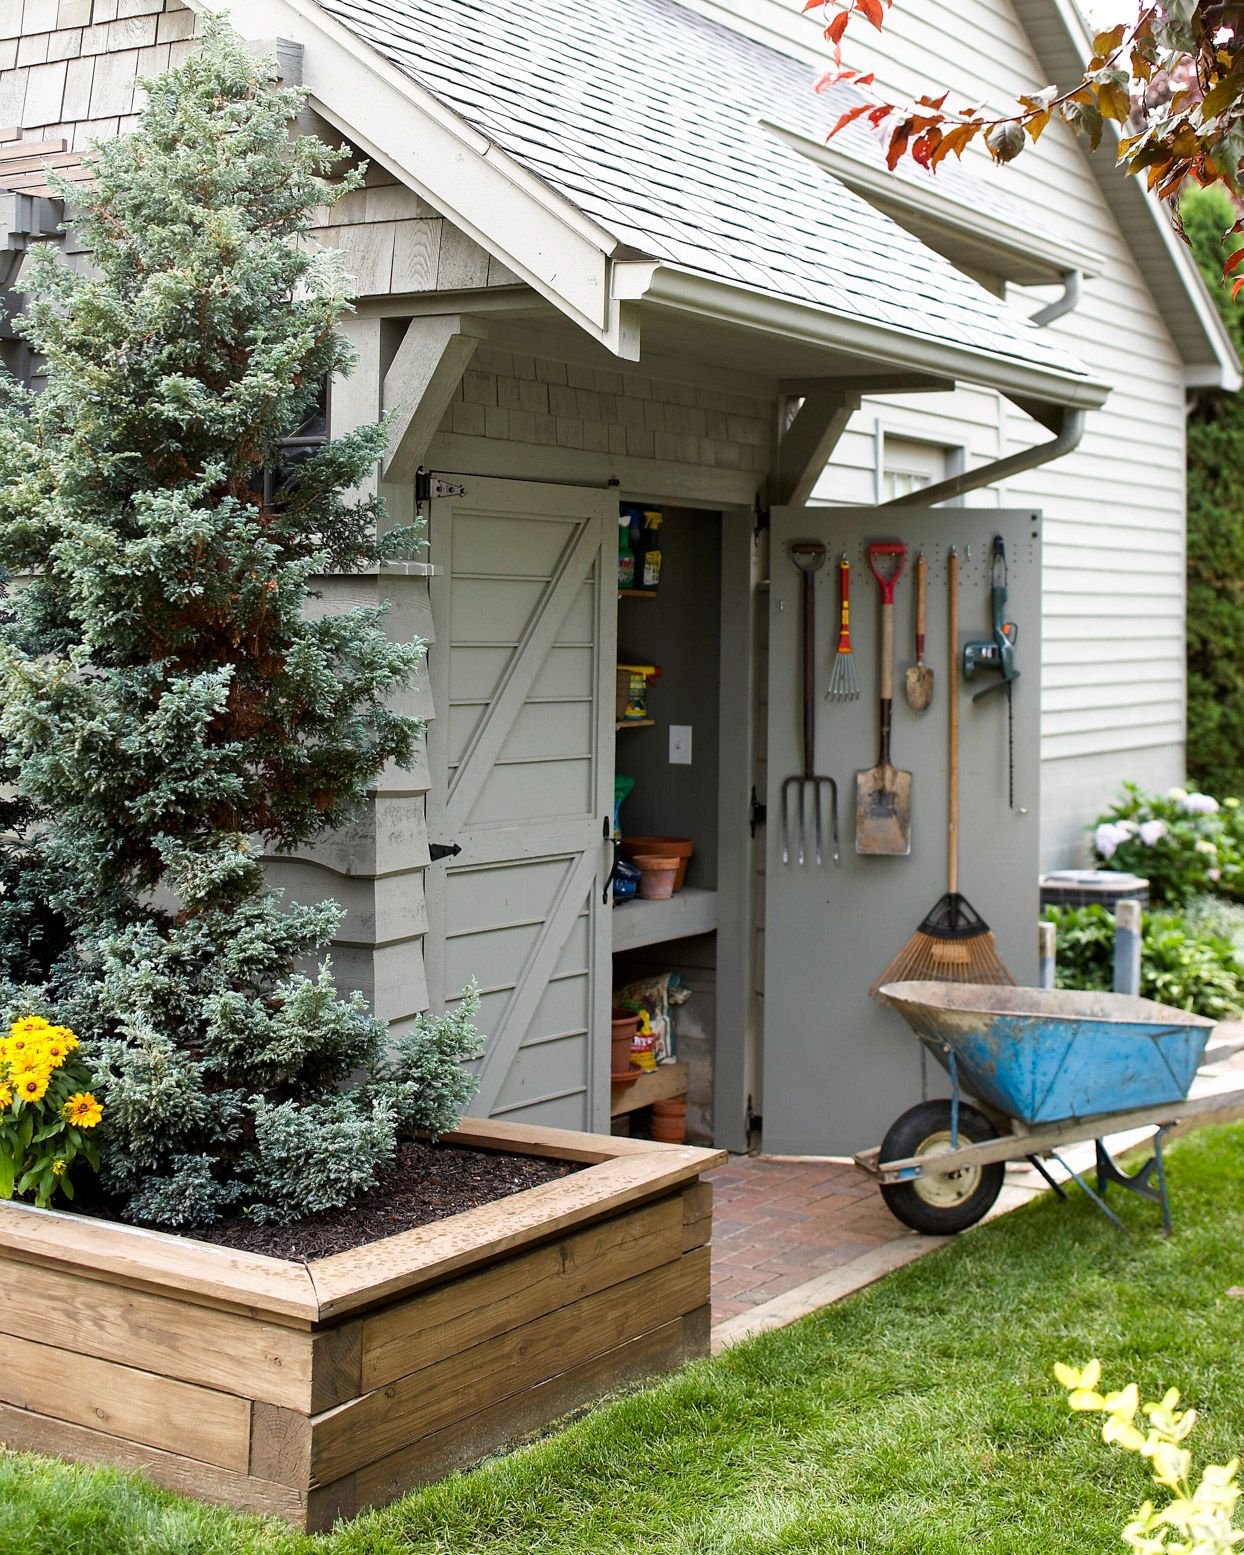 10 Things You Should Never Store in an Outdoor Shed